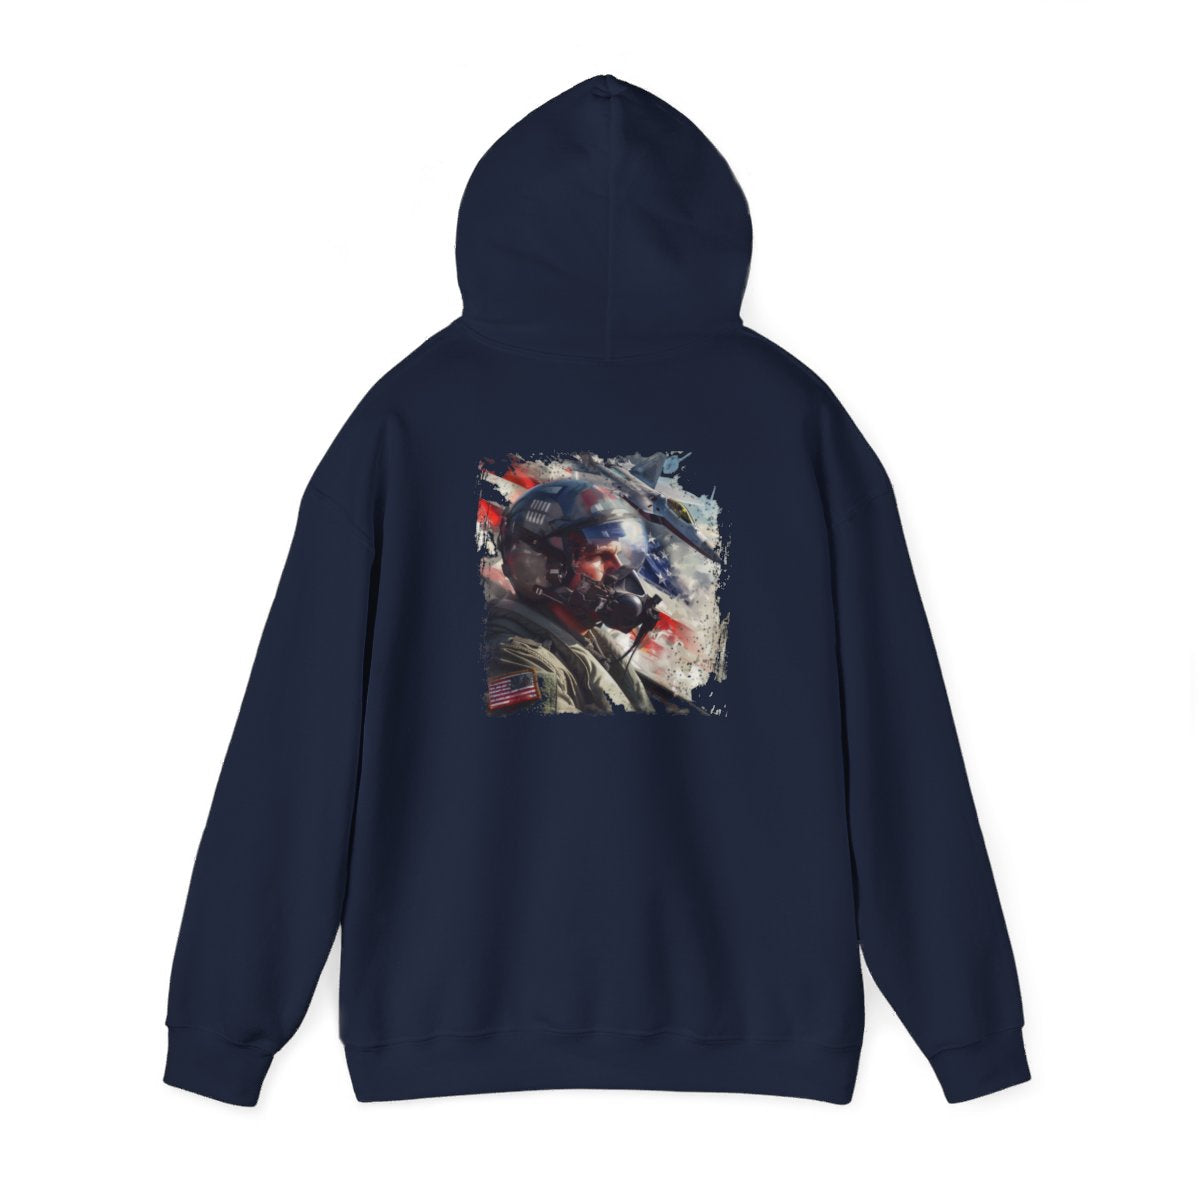 New Military Personnel 'Protecting the nation is an honor' High Quality Unisex Heavy Blend™ Hoodie